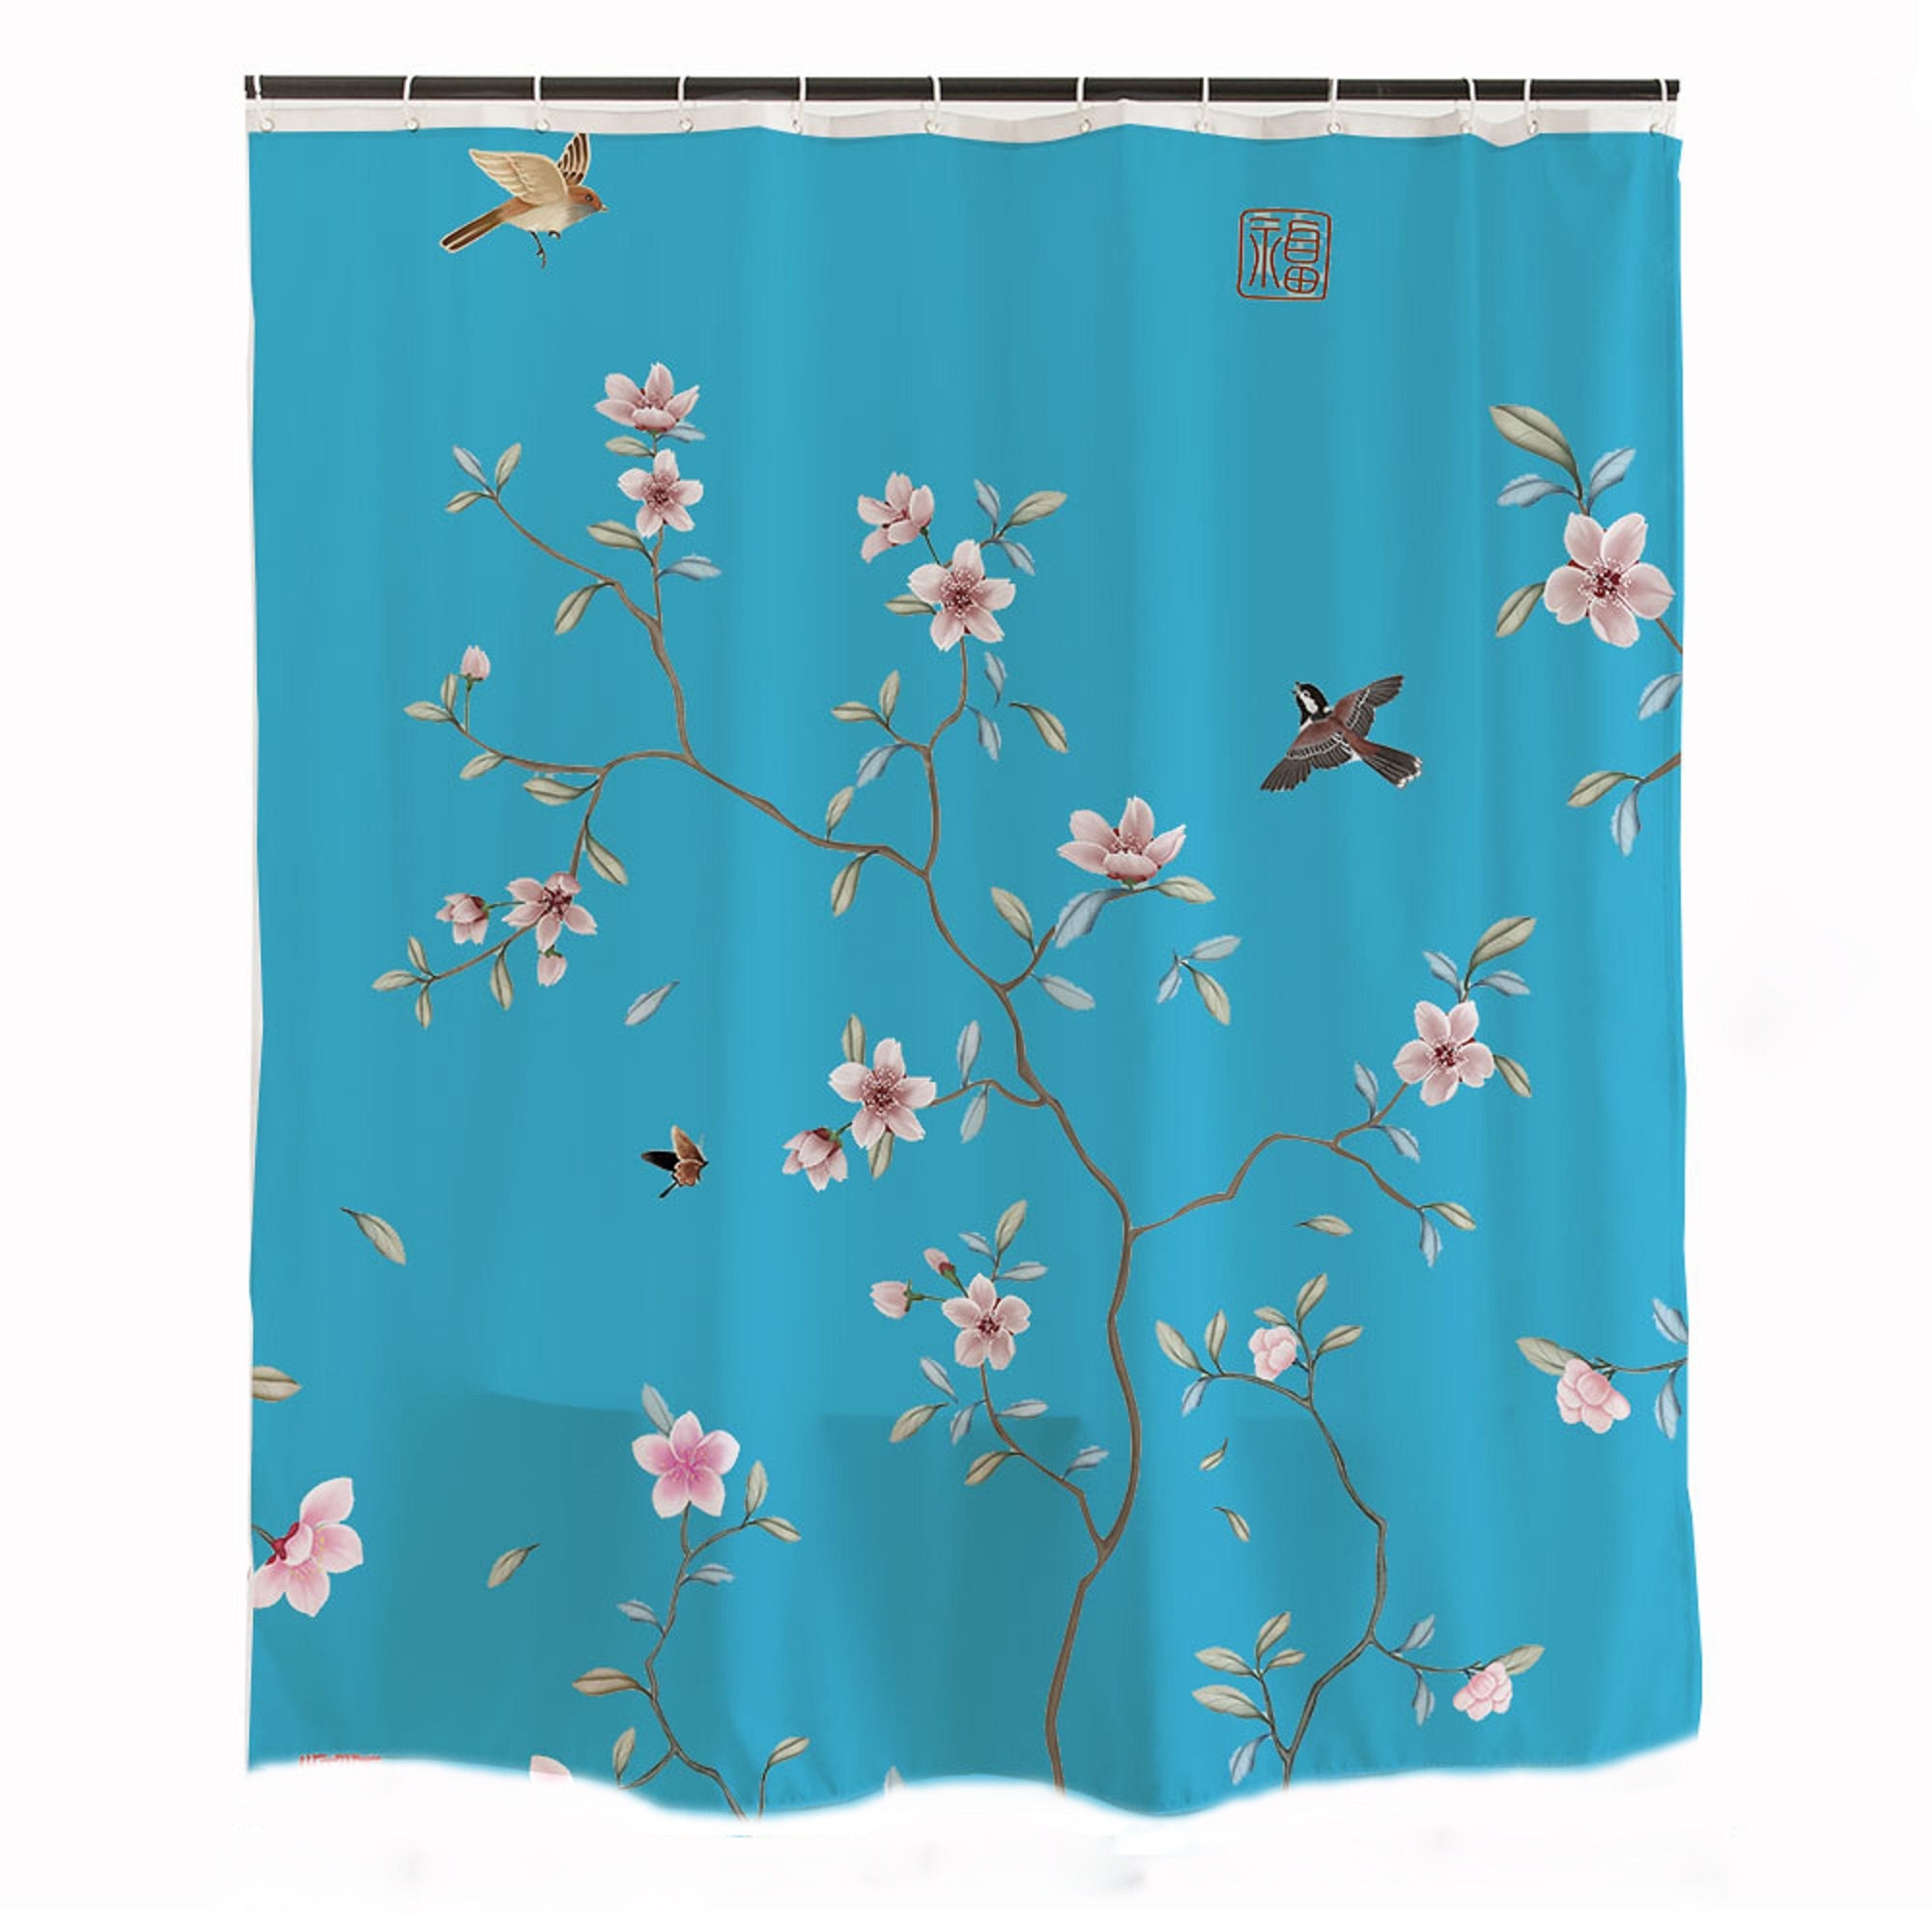 Chinese Bird Painting Shower Curtain, Extra Long Shower Curtain No Hooks Needed